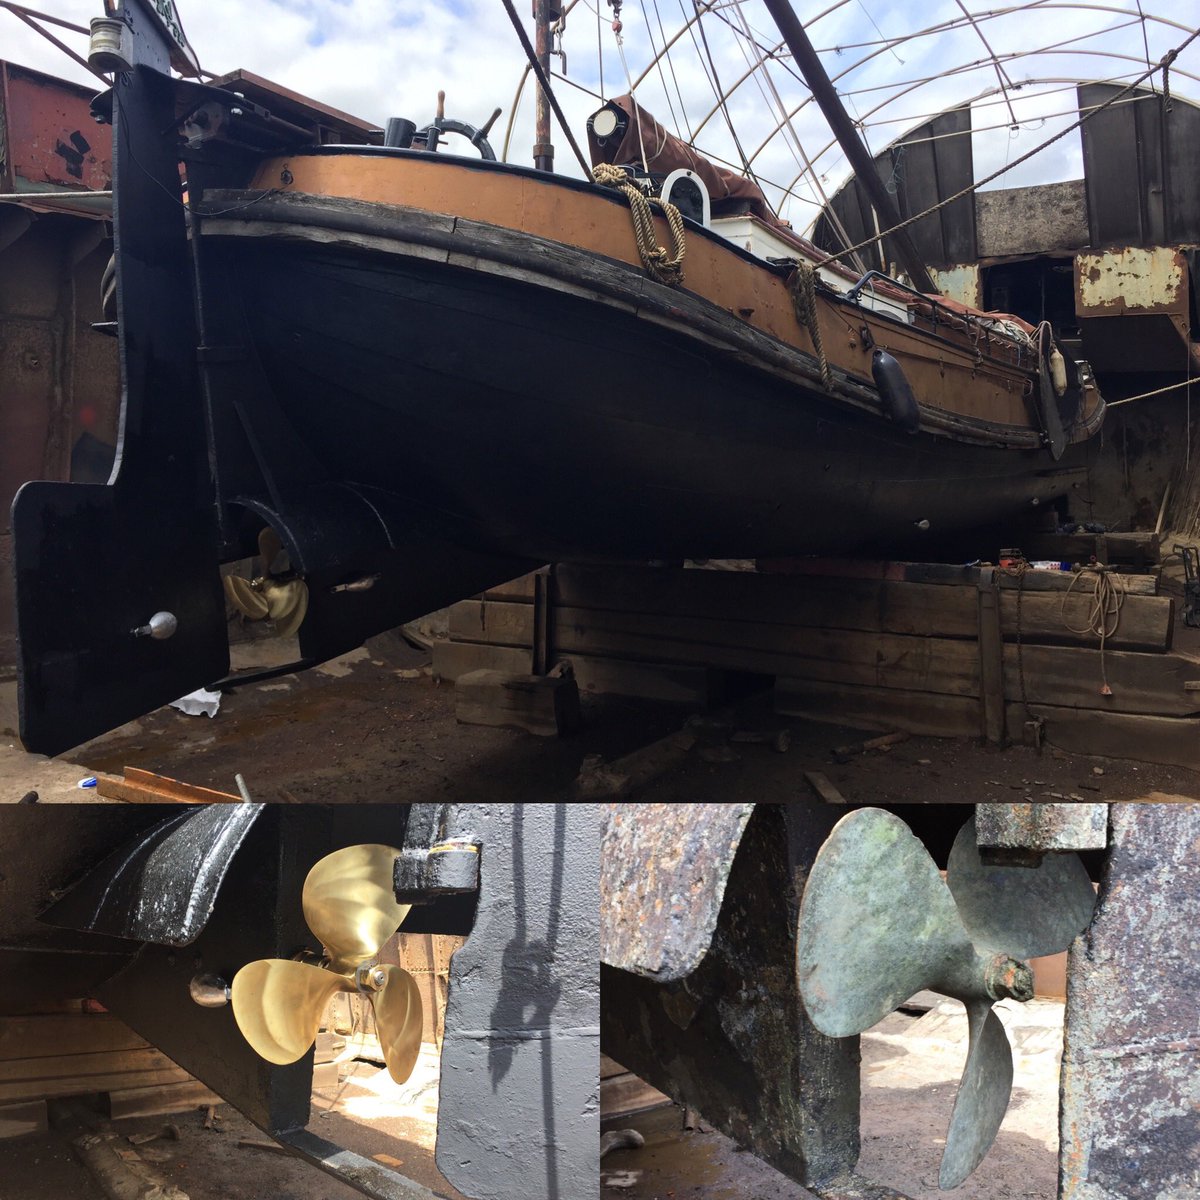 Built in 1879 this Dutch barge shows it’s never too old for a restoration and nice new #sterngear and #propellers #dutchbarge #boatrestoration